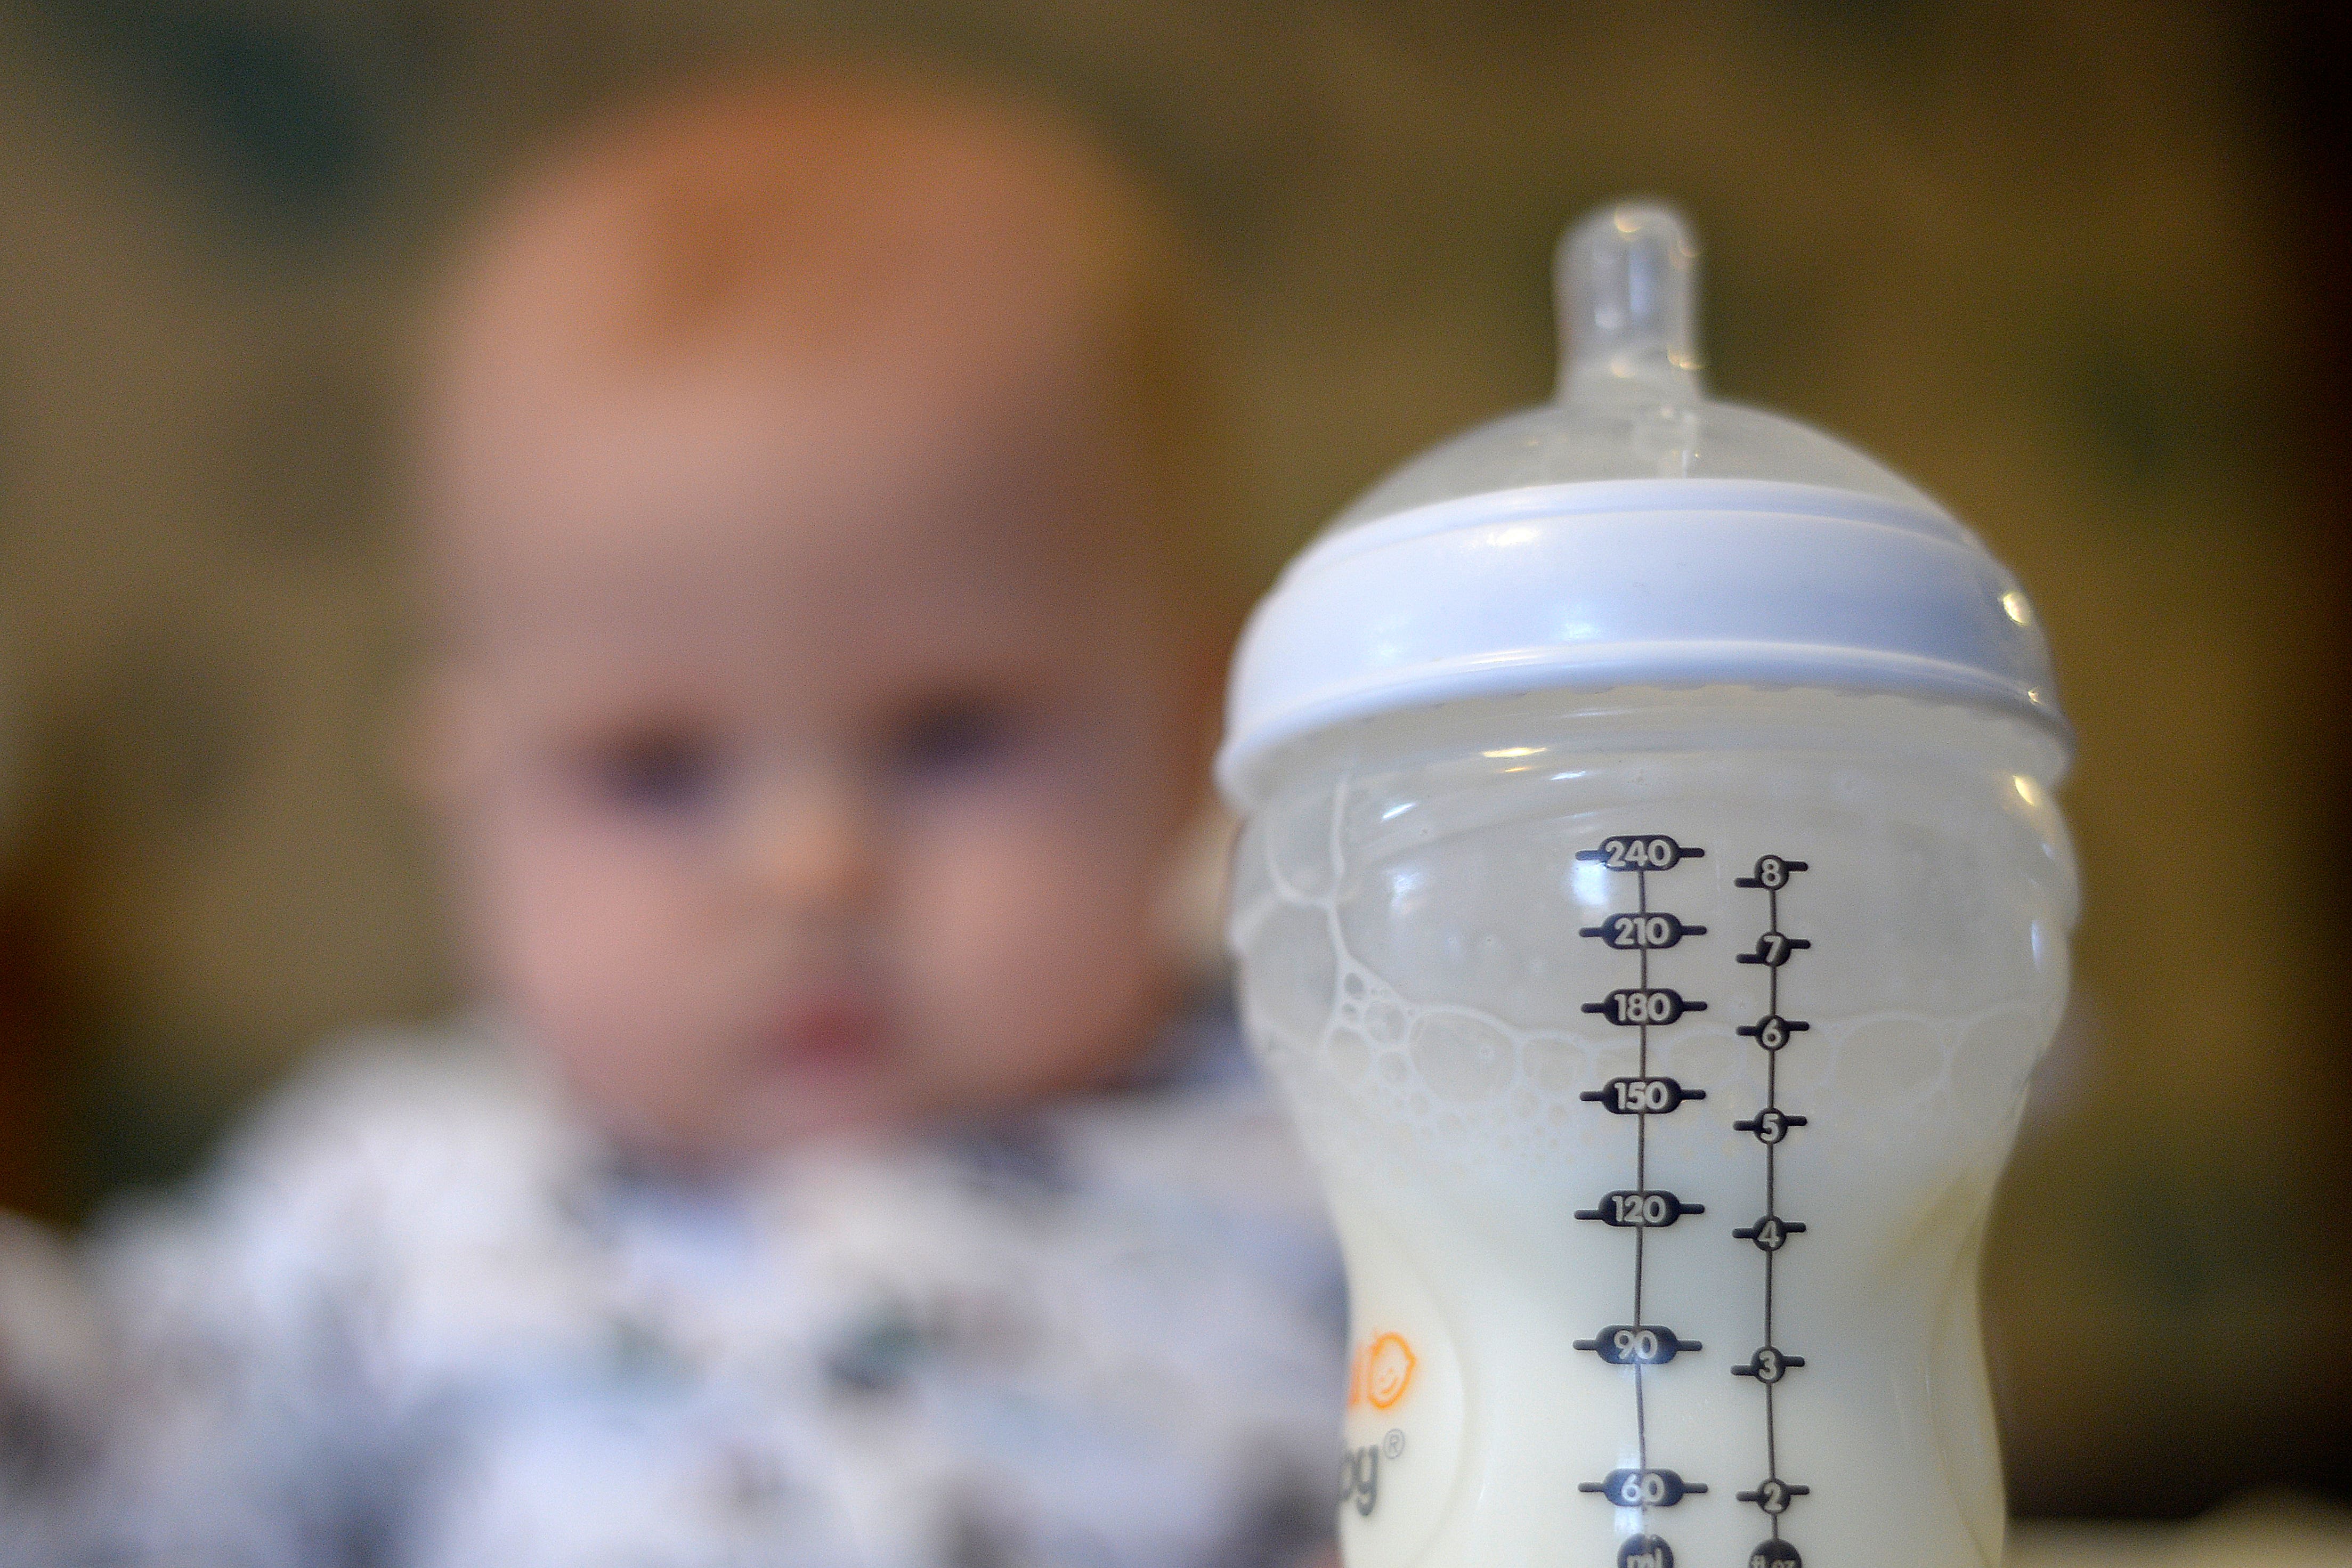 The cost of feeding a 10-week-old baby can cost up to £89 per month